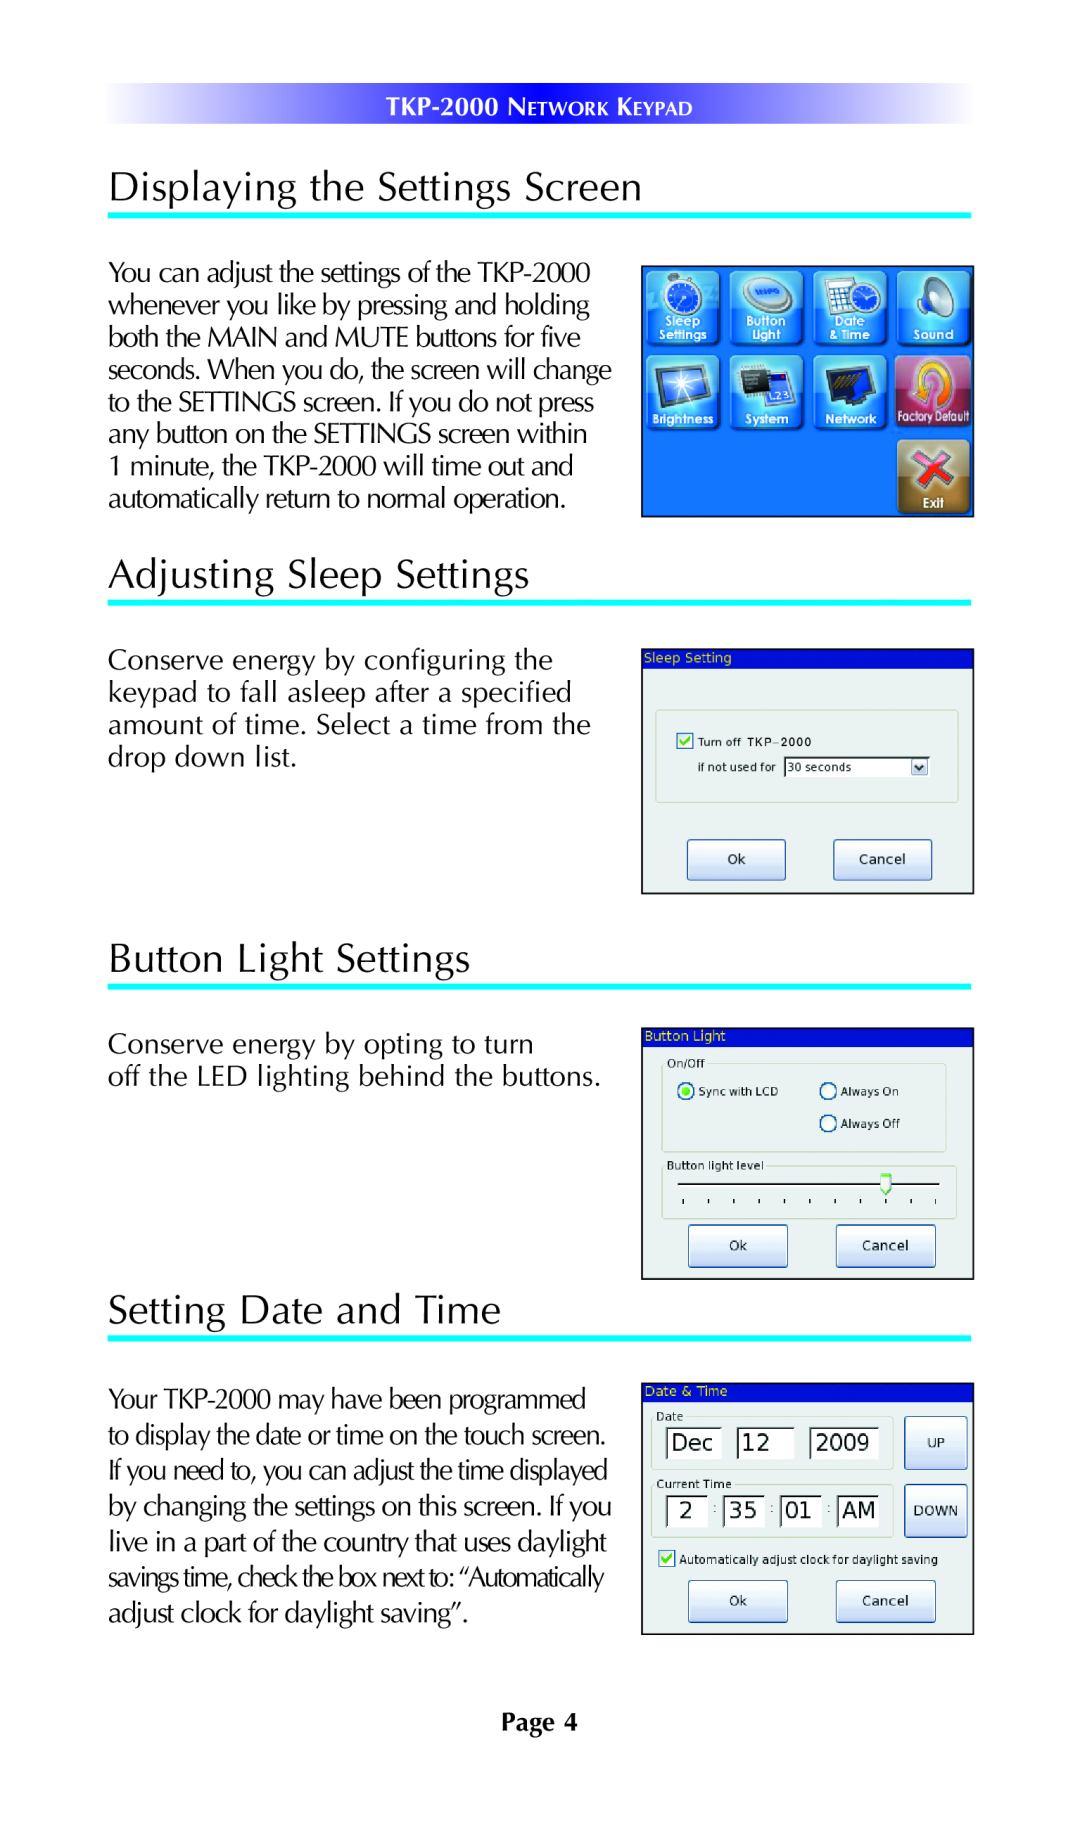 Universal Remote Control TKP-2000 Displaying the Settings Screen, Adjusting Sleep Settings, Button Light Settings, Page 